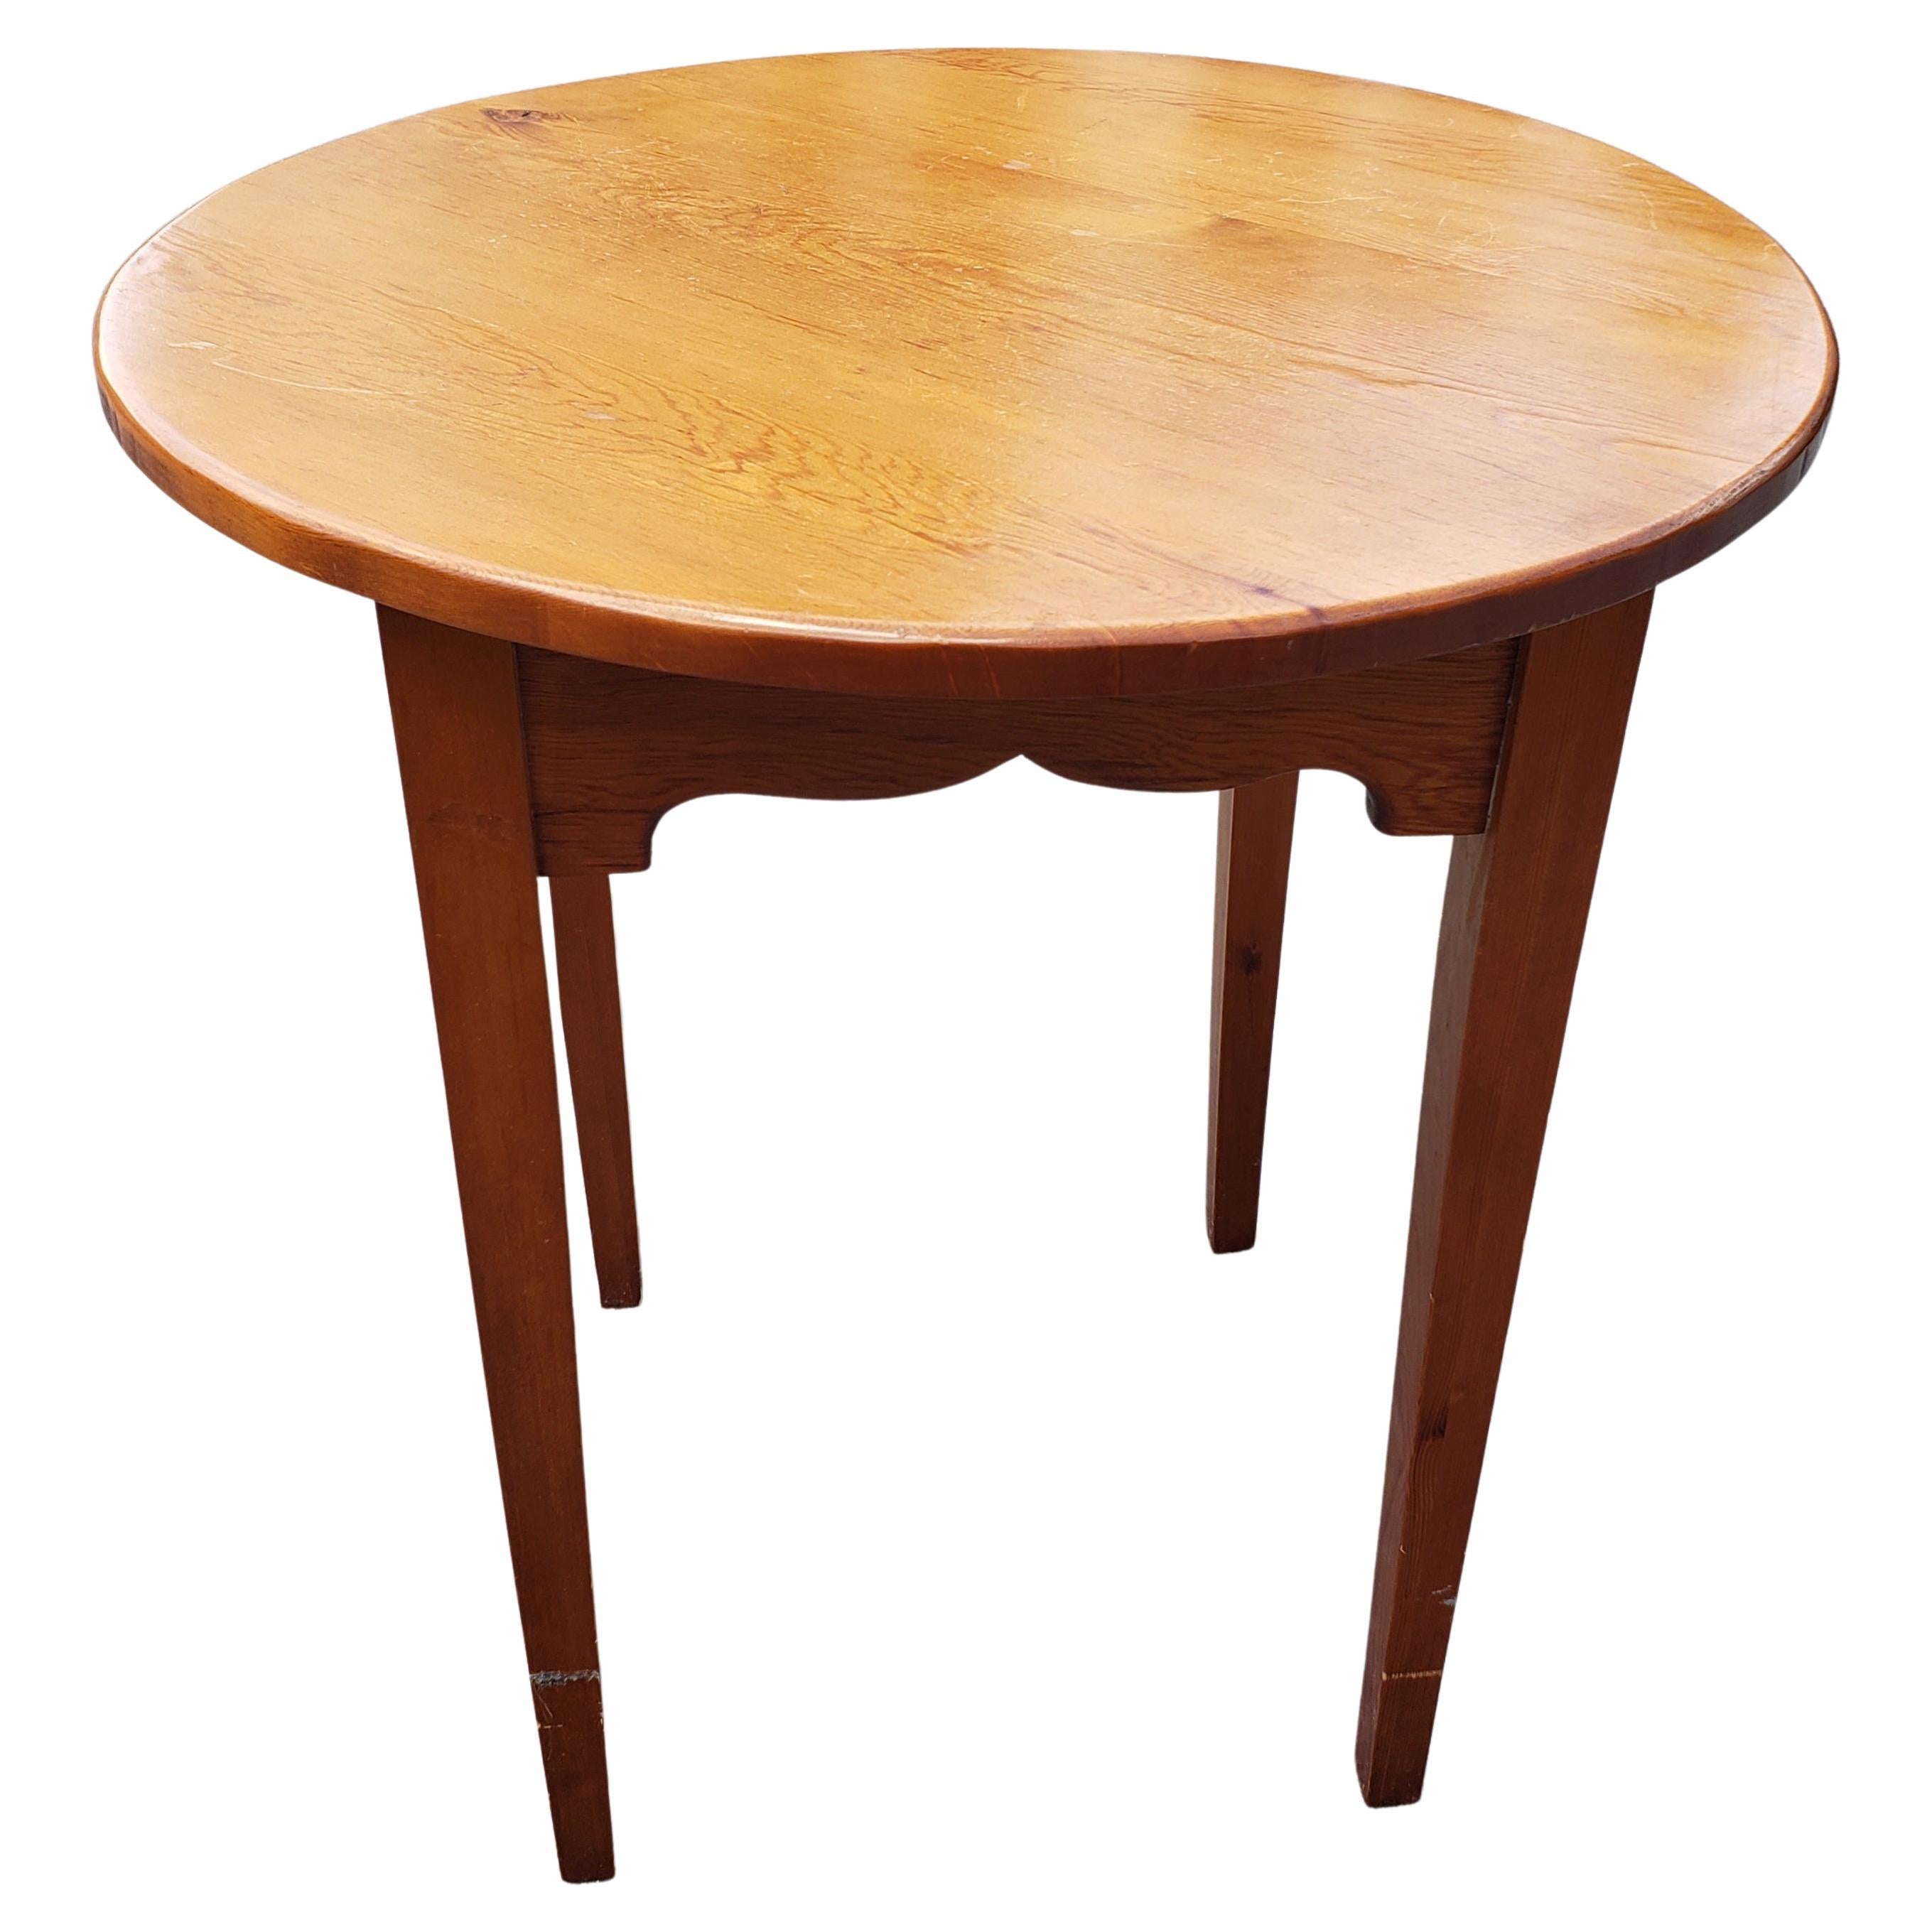 American Craftsman Amish Hand-Crafted Pine Round Lamp Table For Sale